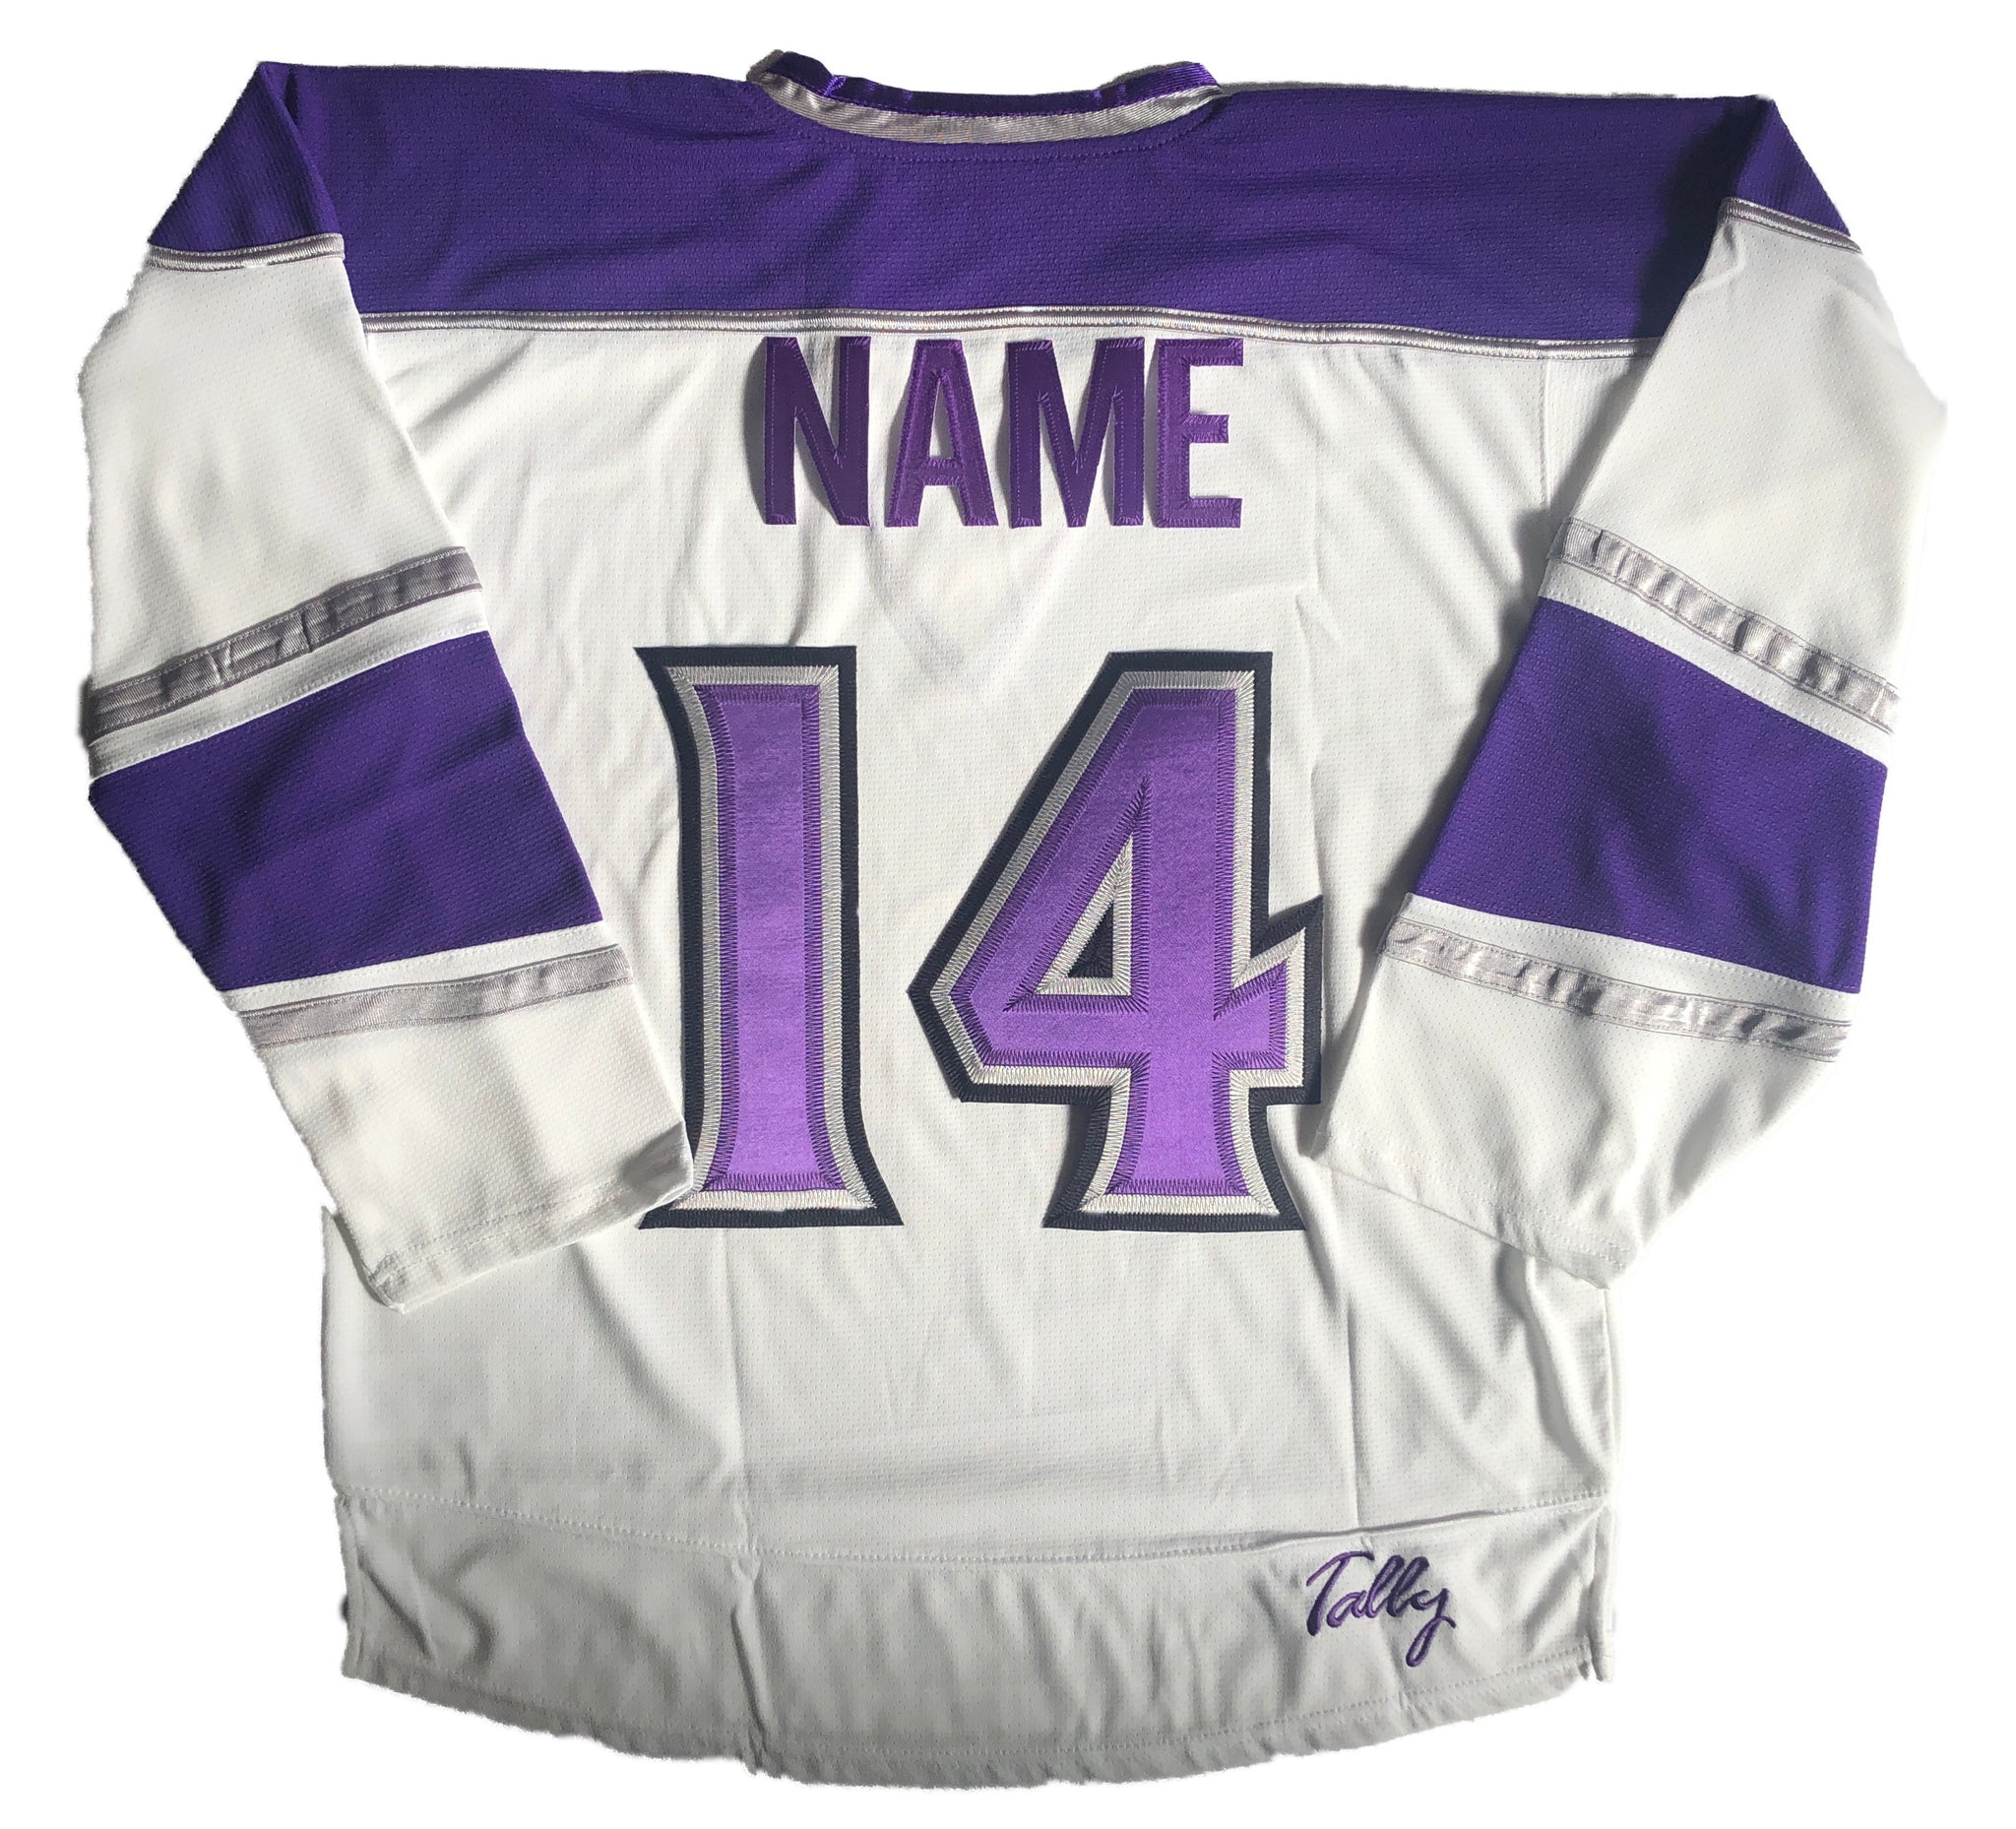 Custom Hockey Jerseys with A Blackhawk Logo and Shoulder Patches Adult Goalie Cut / (name and Number on Back and Sleeves) / White